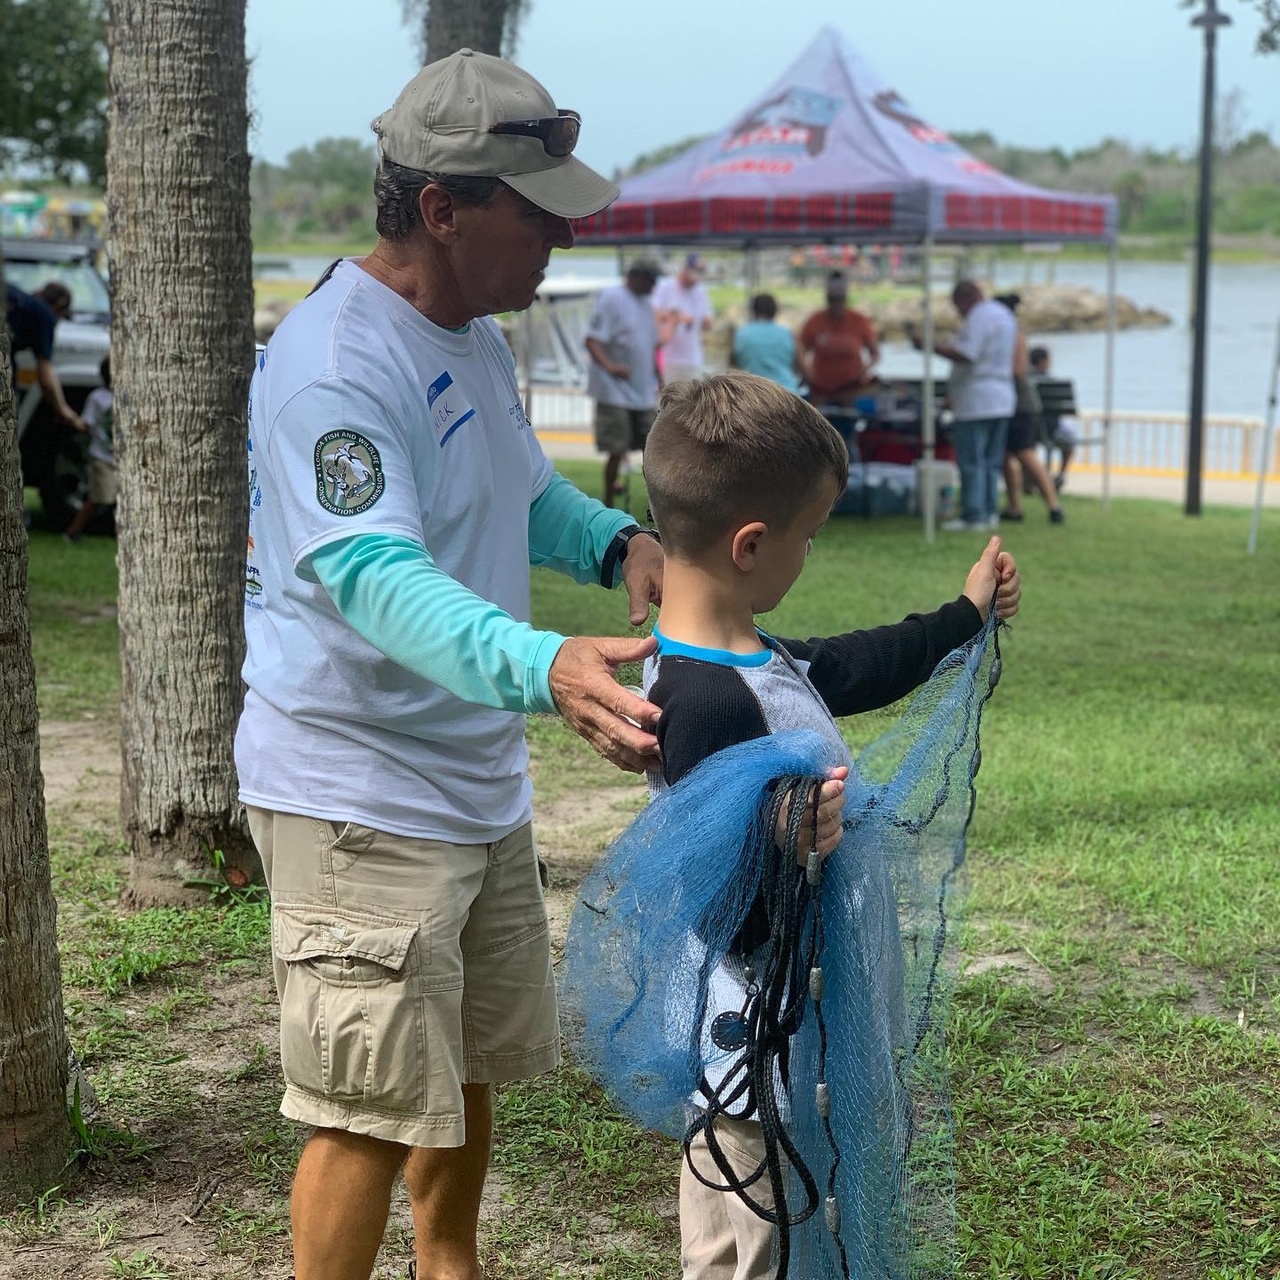 Volunteer Bear Carter shows a young angler how to throw a cast net. Photo courtesy of Marketing2Go